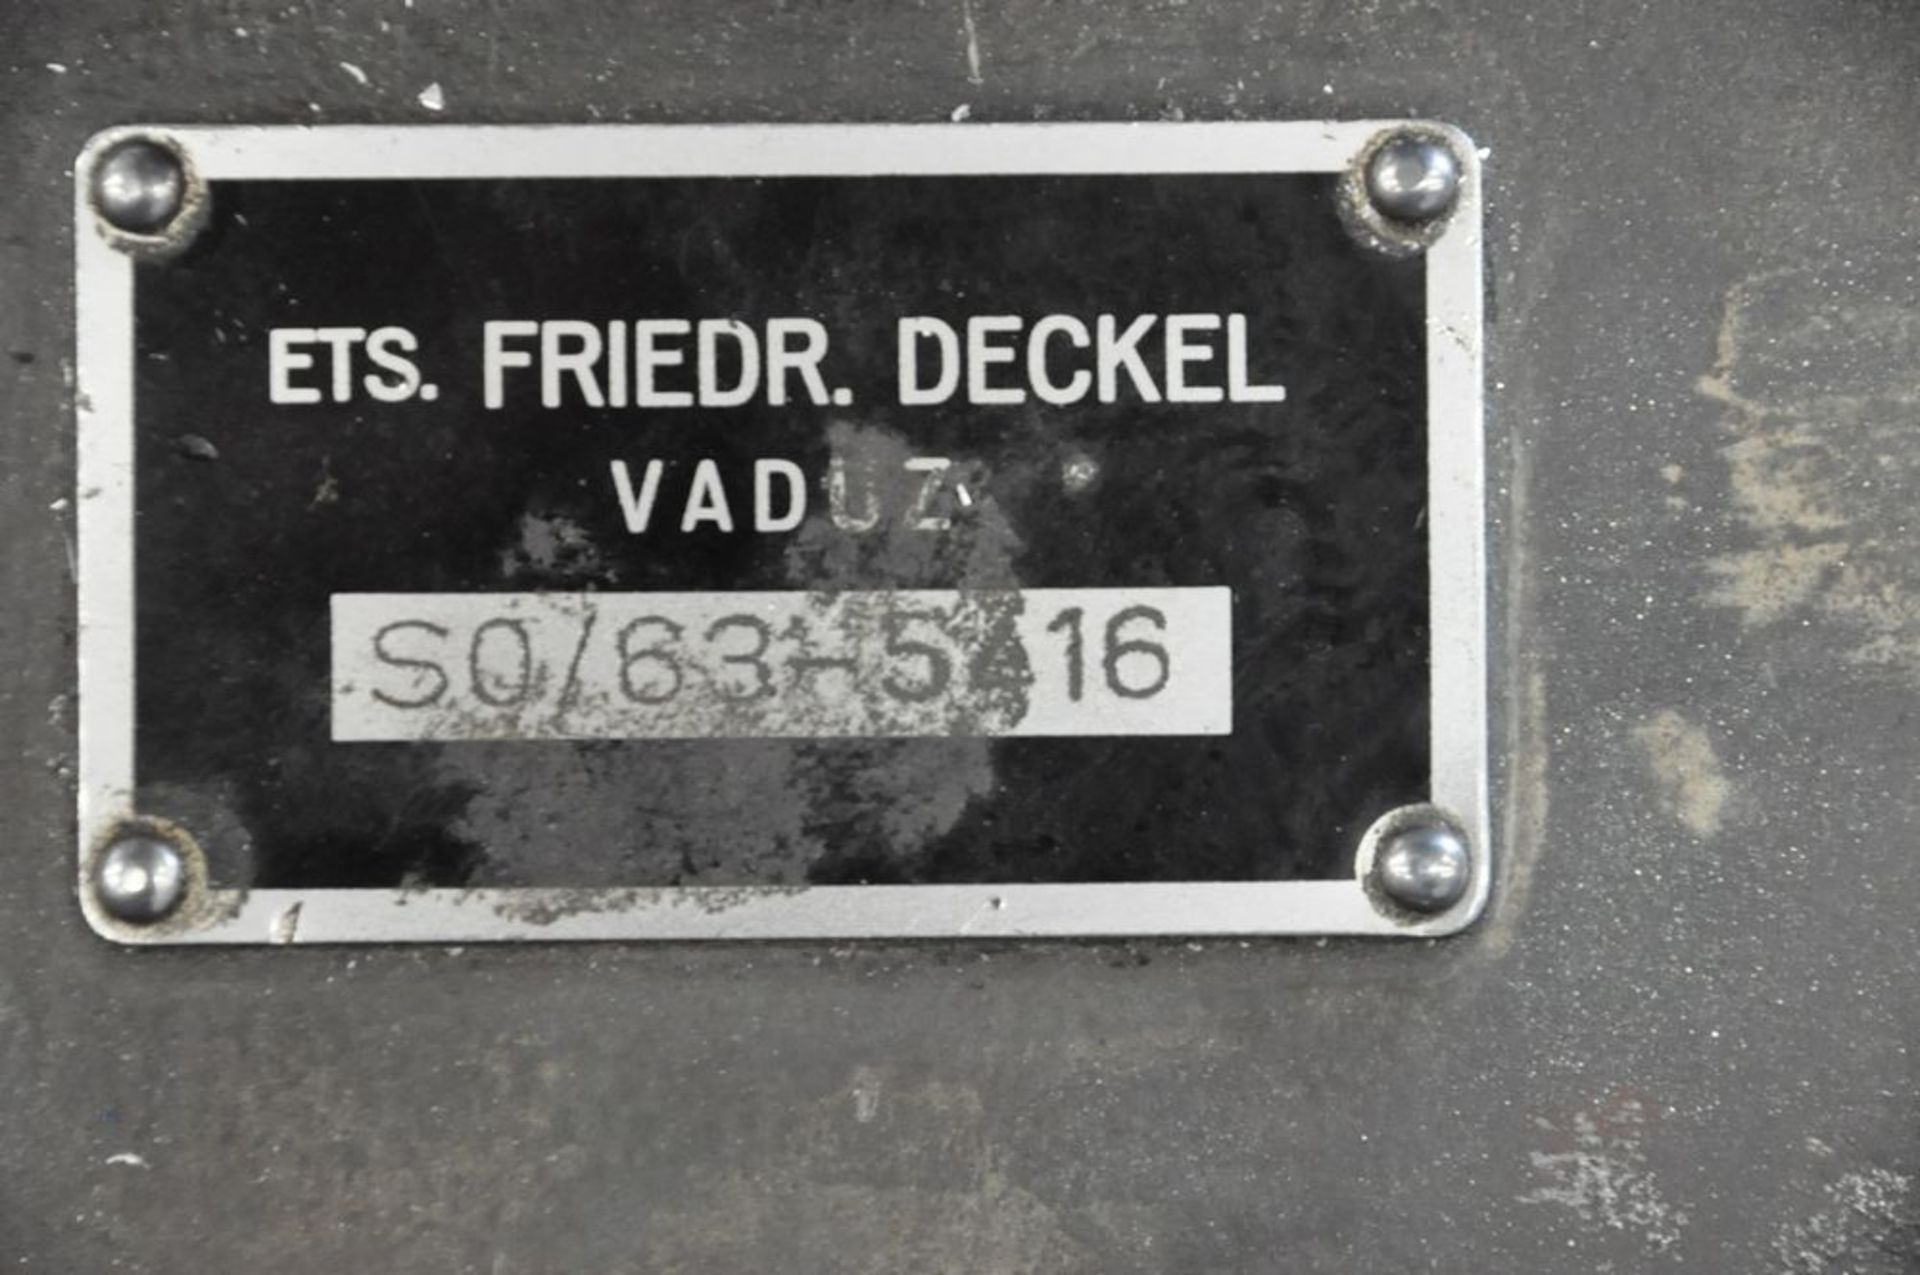 Deckel Model SO Tool Grinder, S/n 63-5416 with (6) Collets - Image 3 of 3